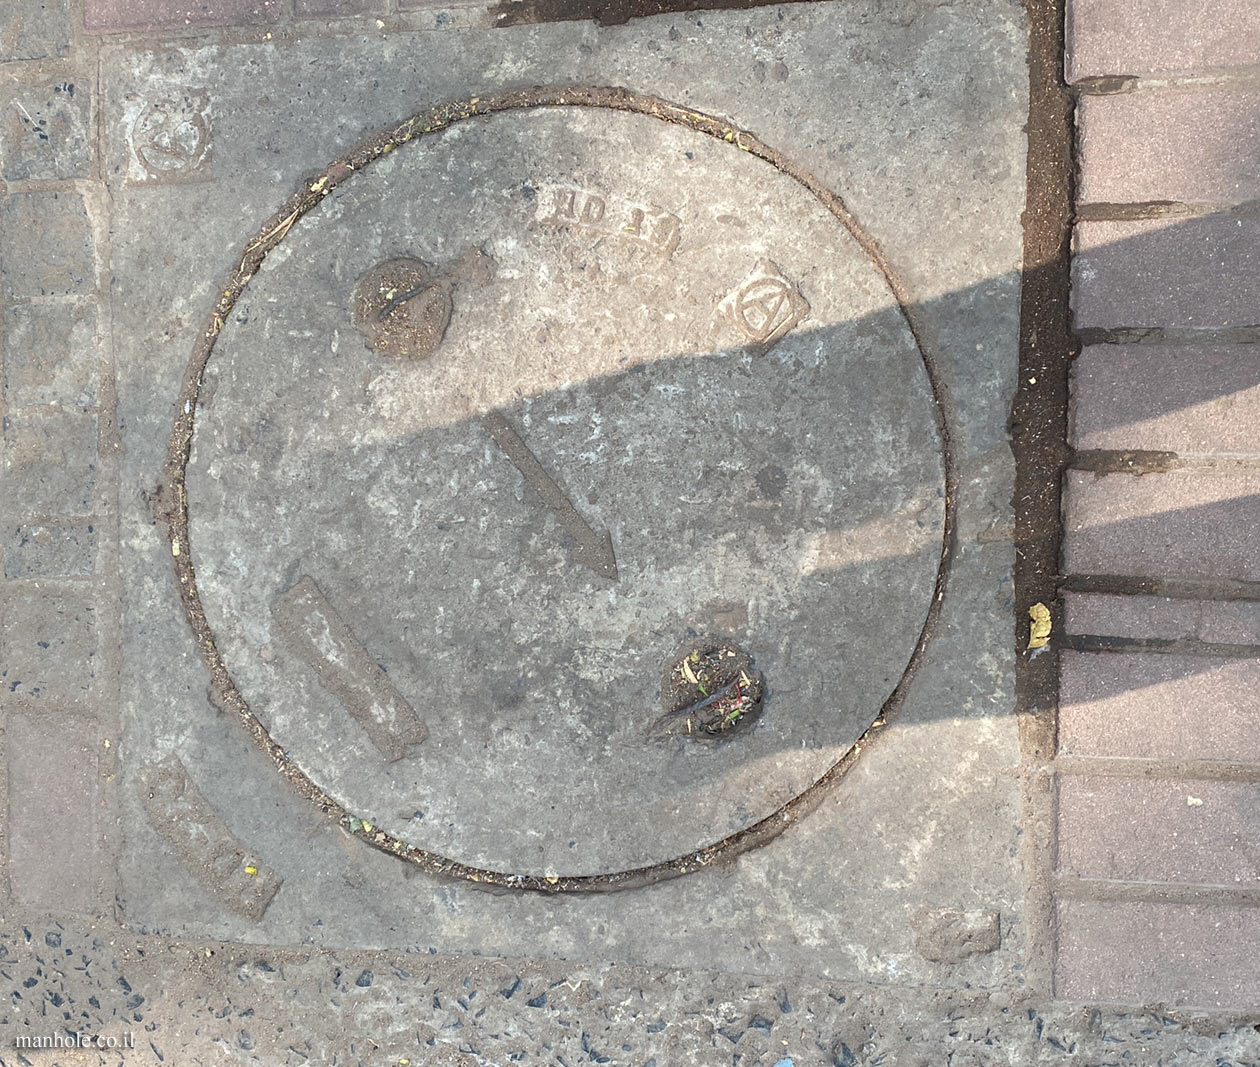 Ahmedabad - A concrete cap with an arrow mark in the center